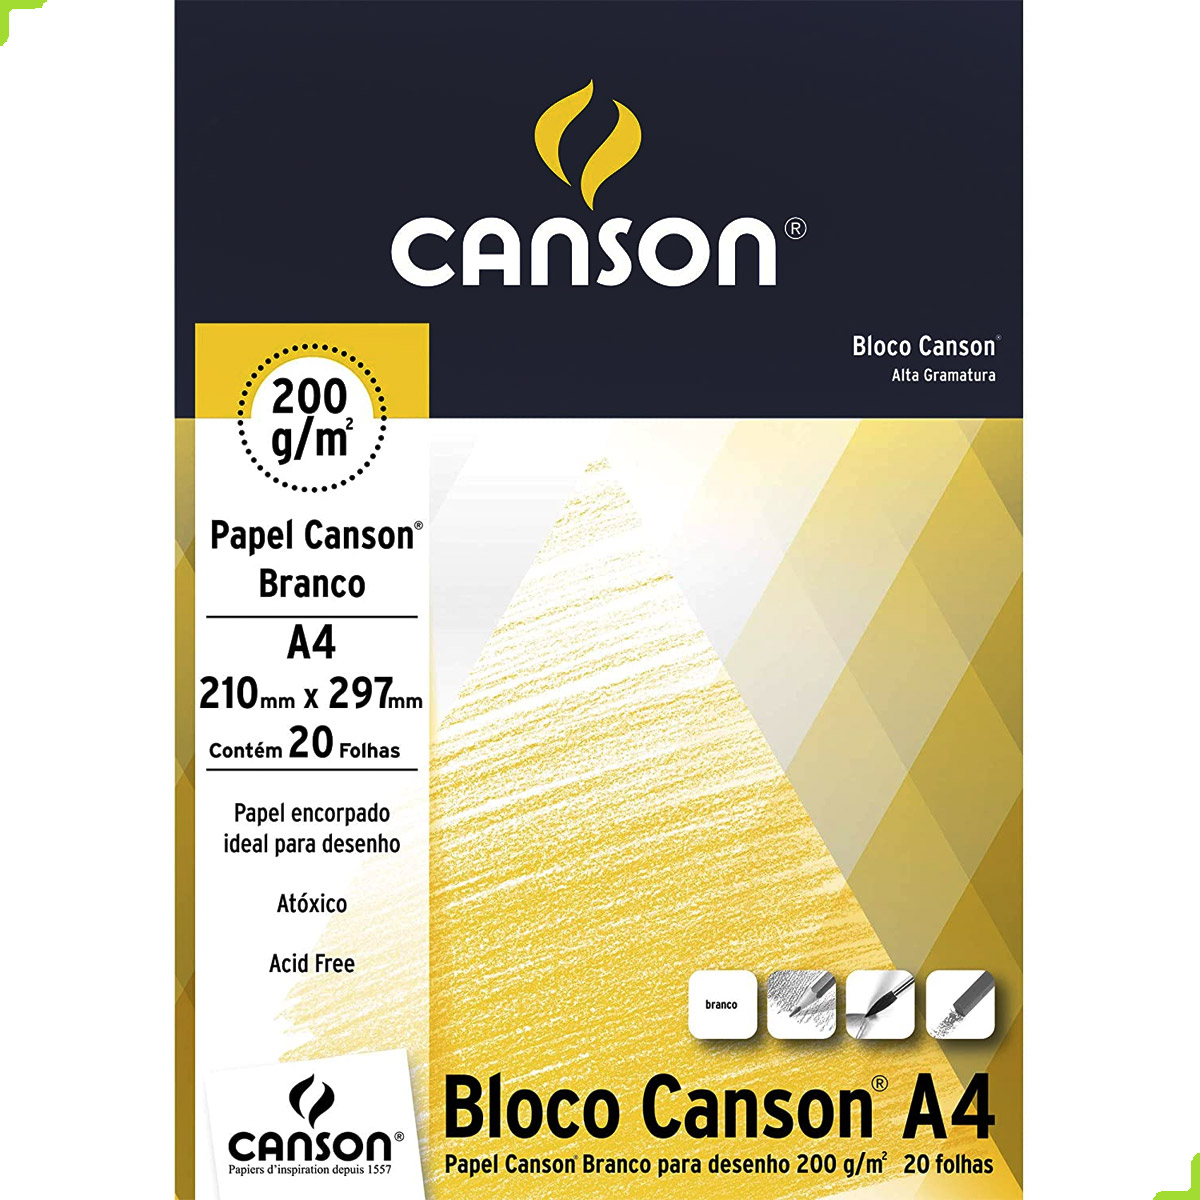 Papel Canson A4 200 g/m² - Canson